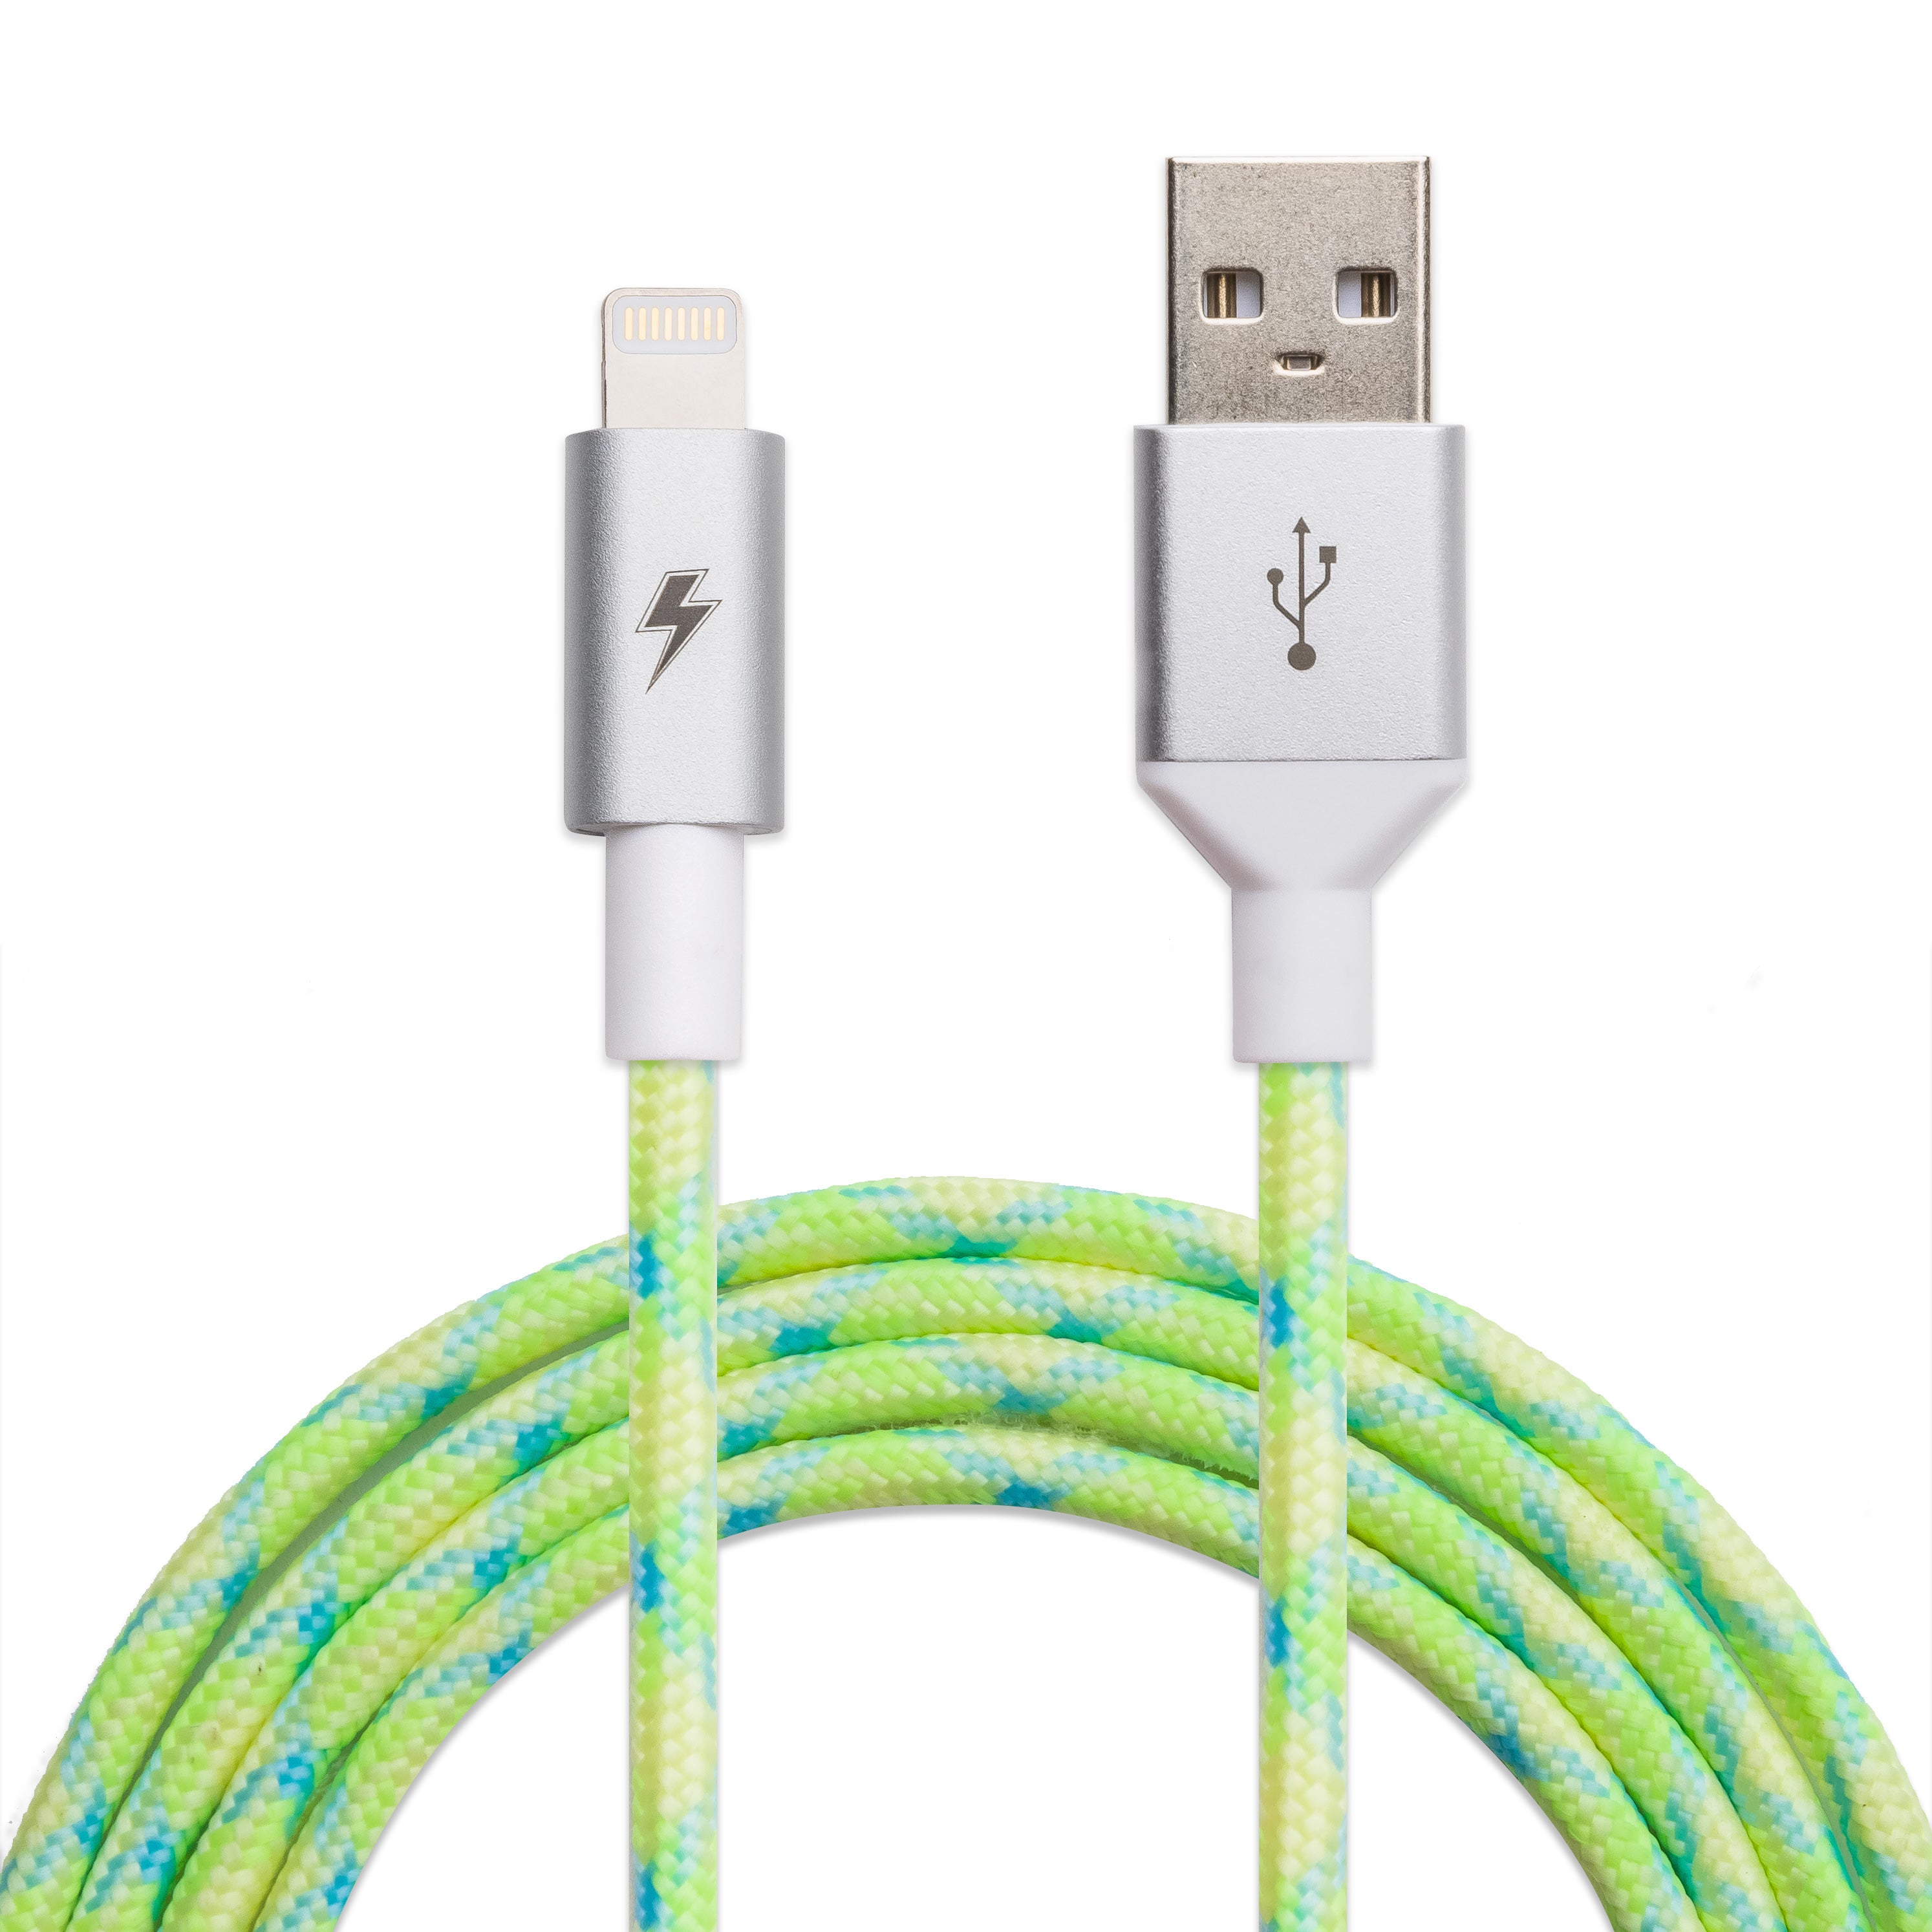 3m White 8-pin Lightning to USB Cable - Lightning Cables